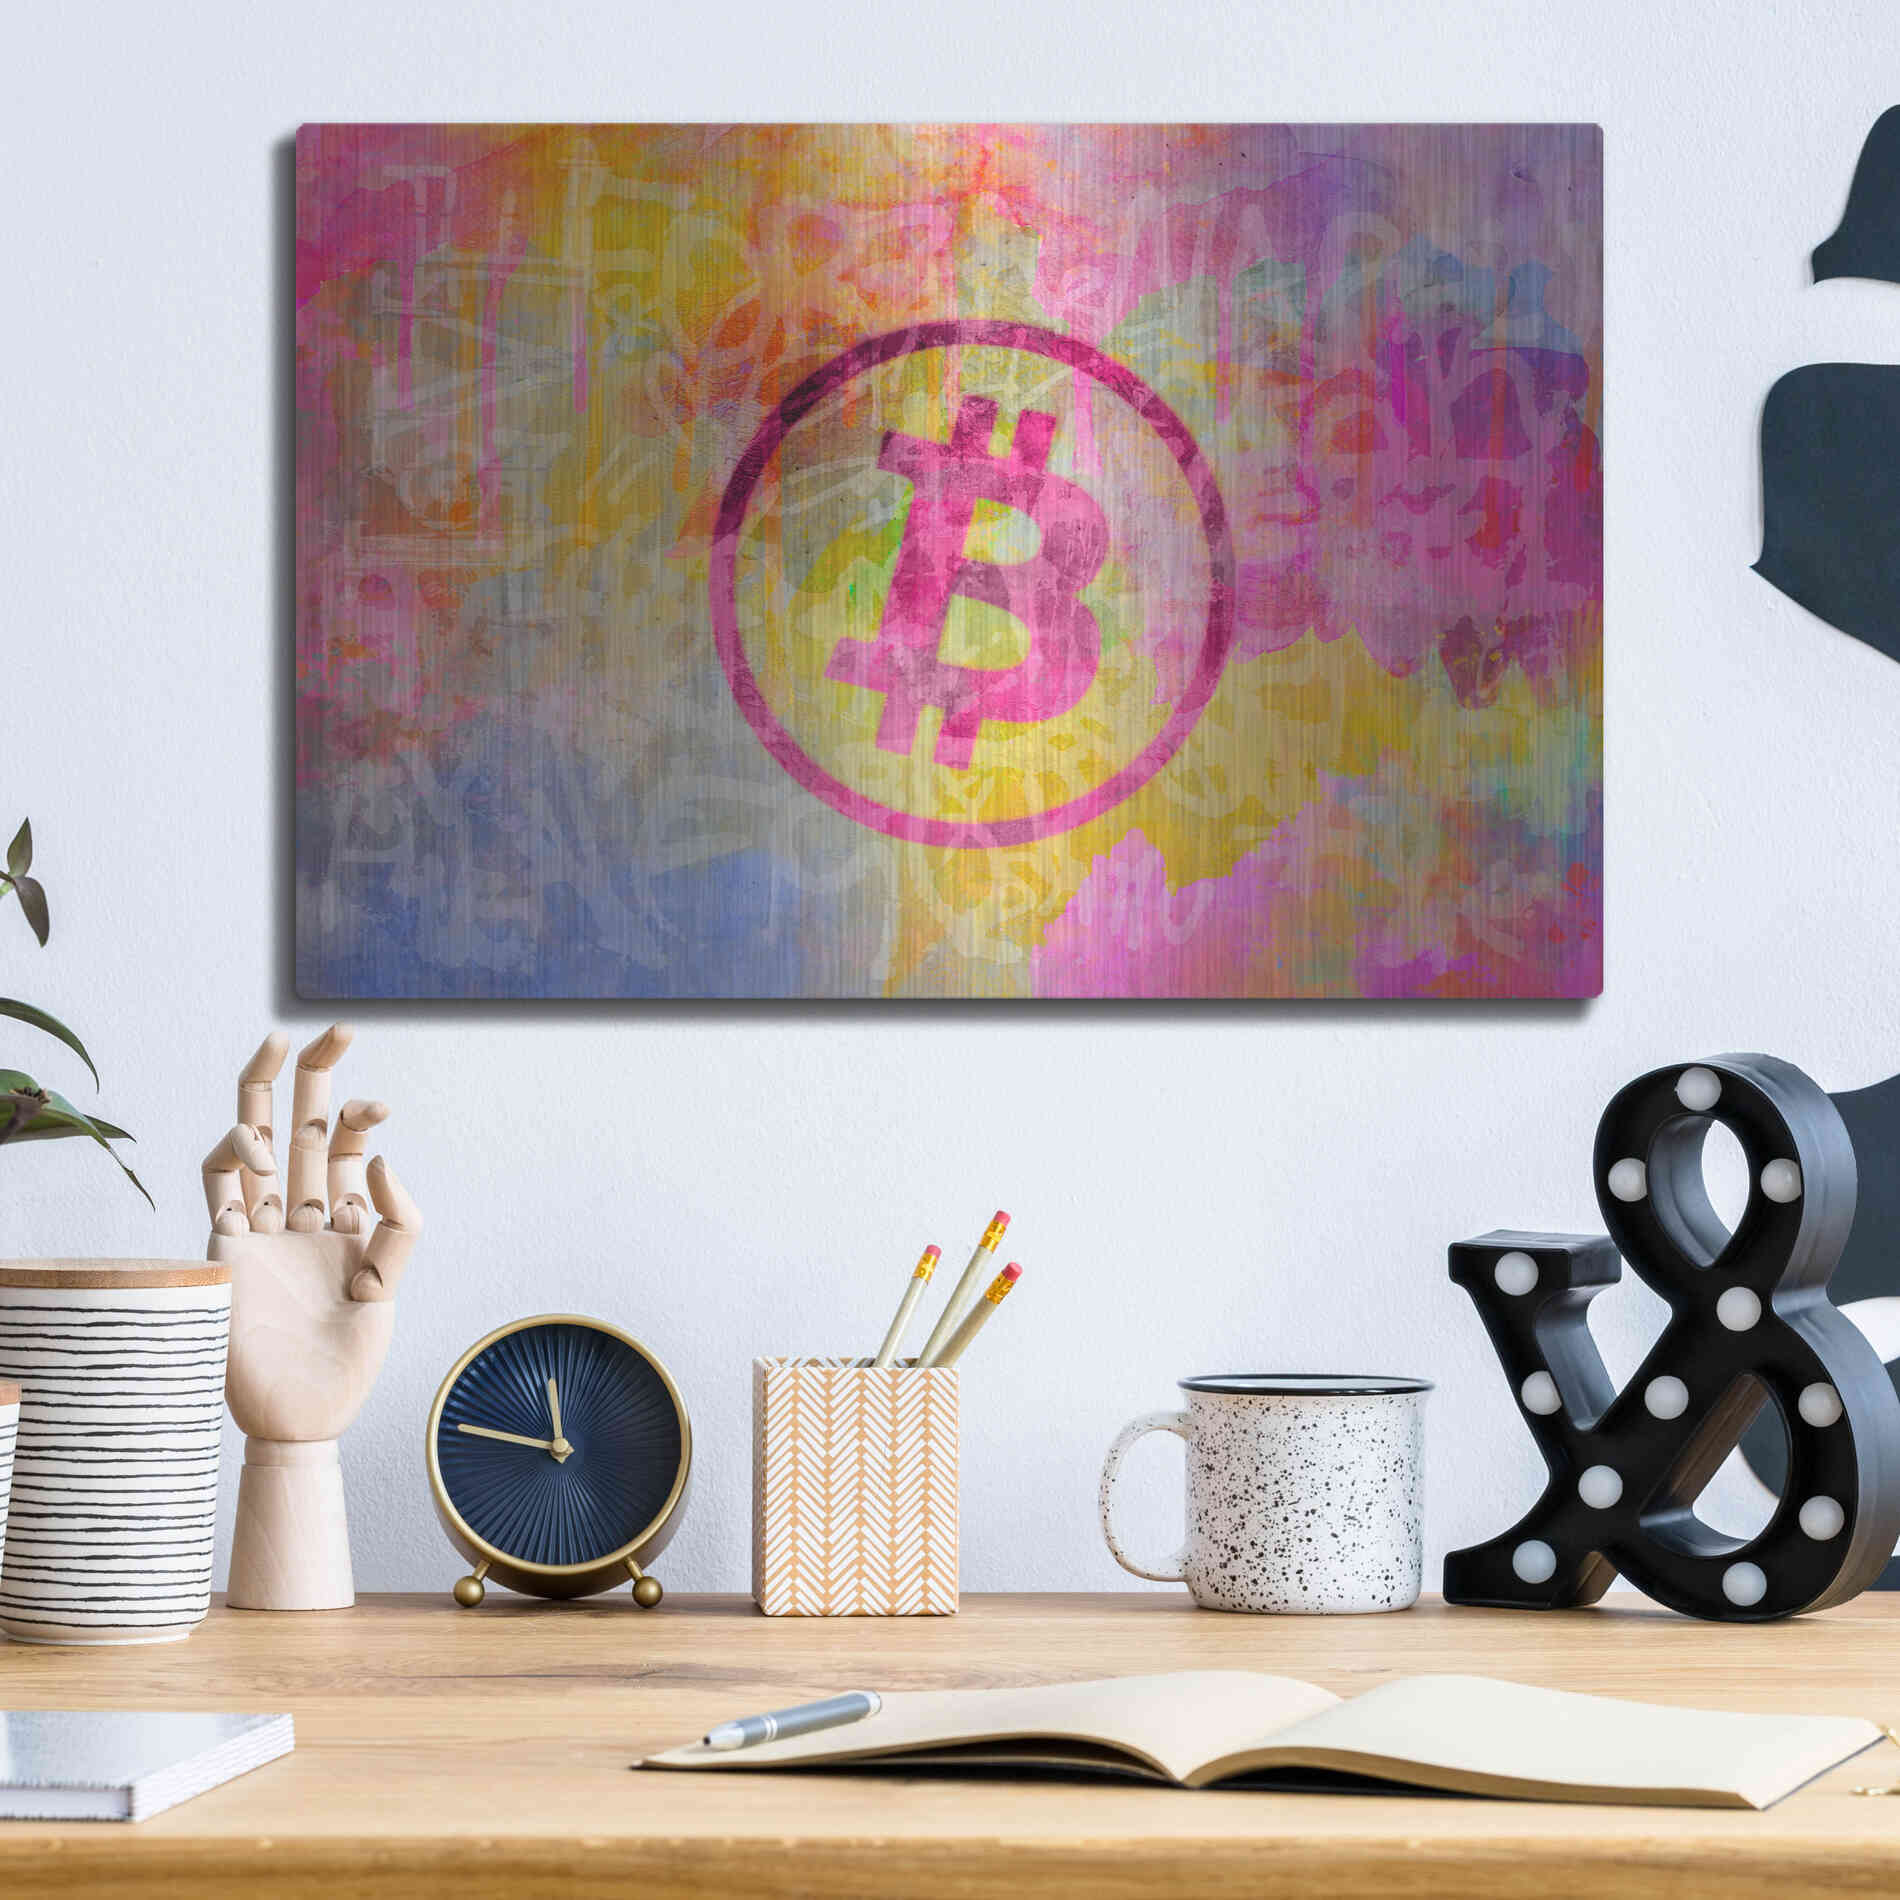 Luxe Metal Art 'Street Art Bitcoin' by Andrea Haase, Metal Wall At,16x12